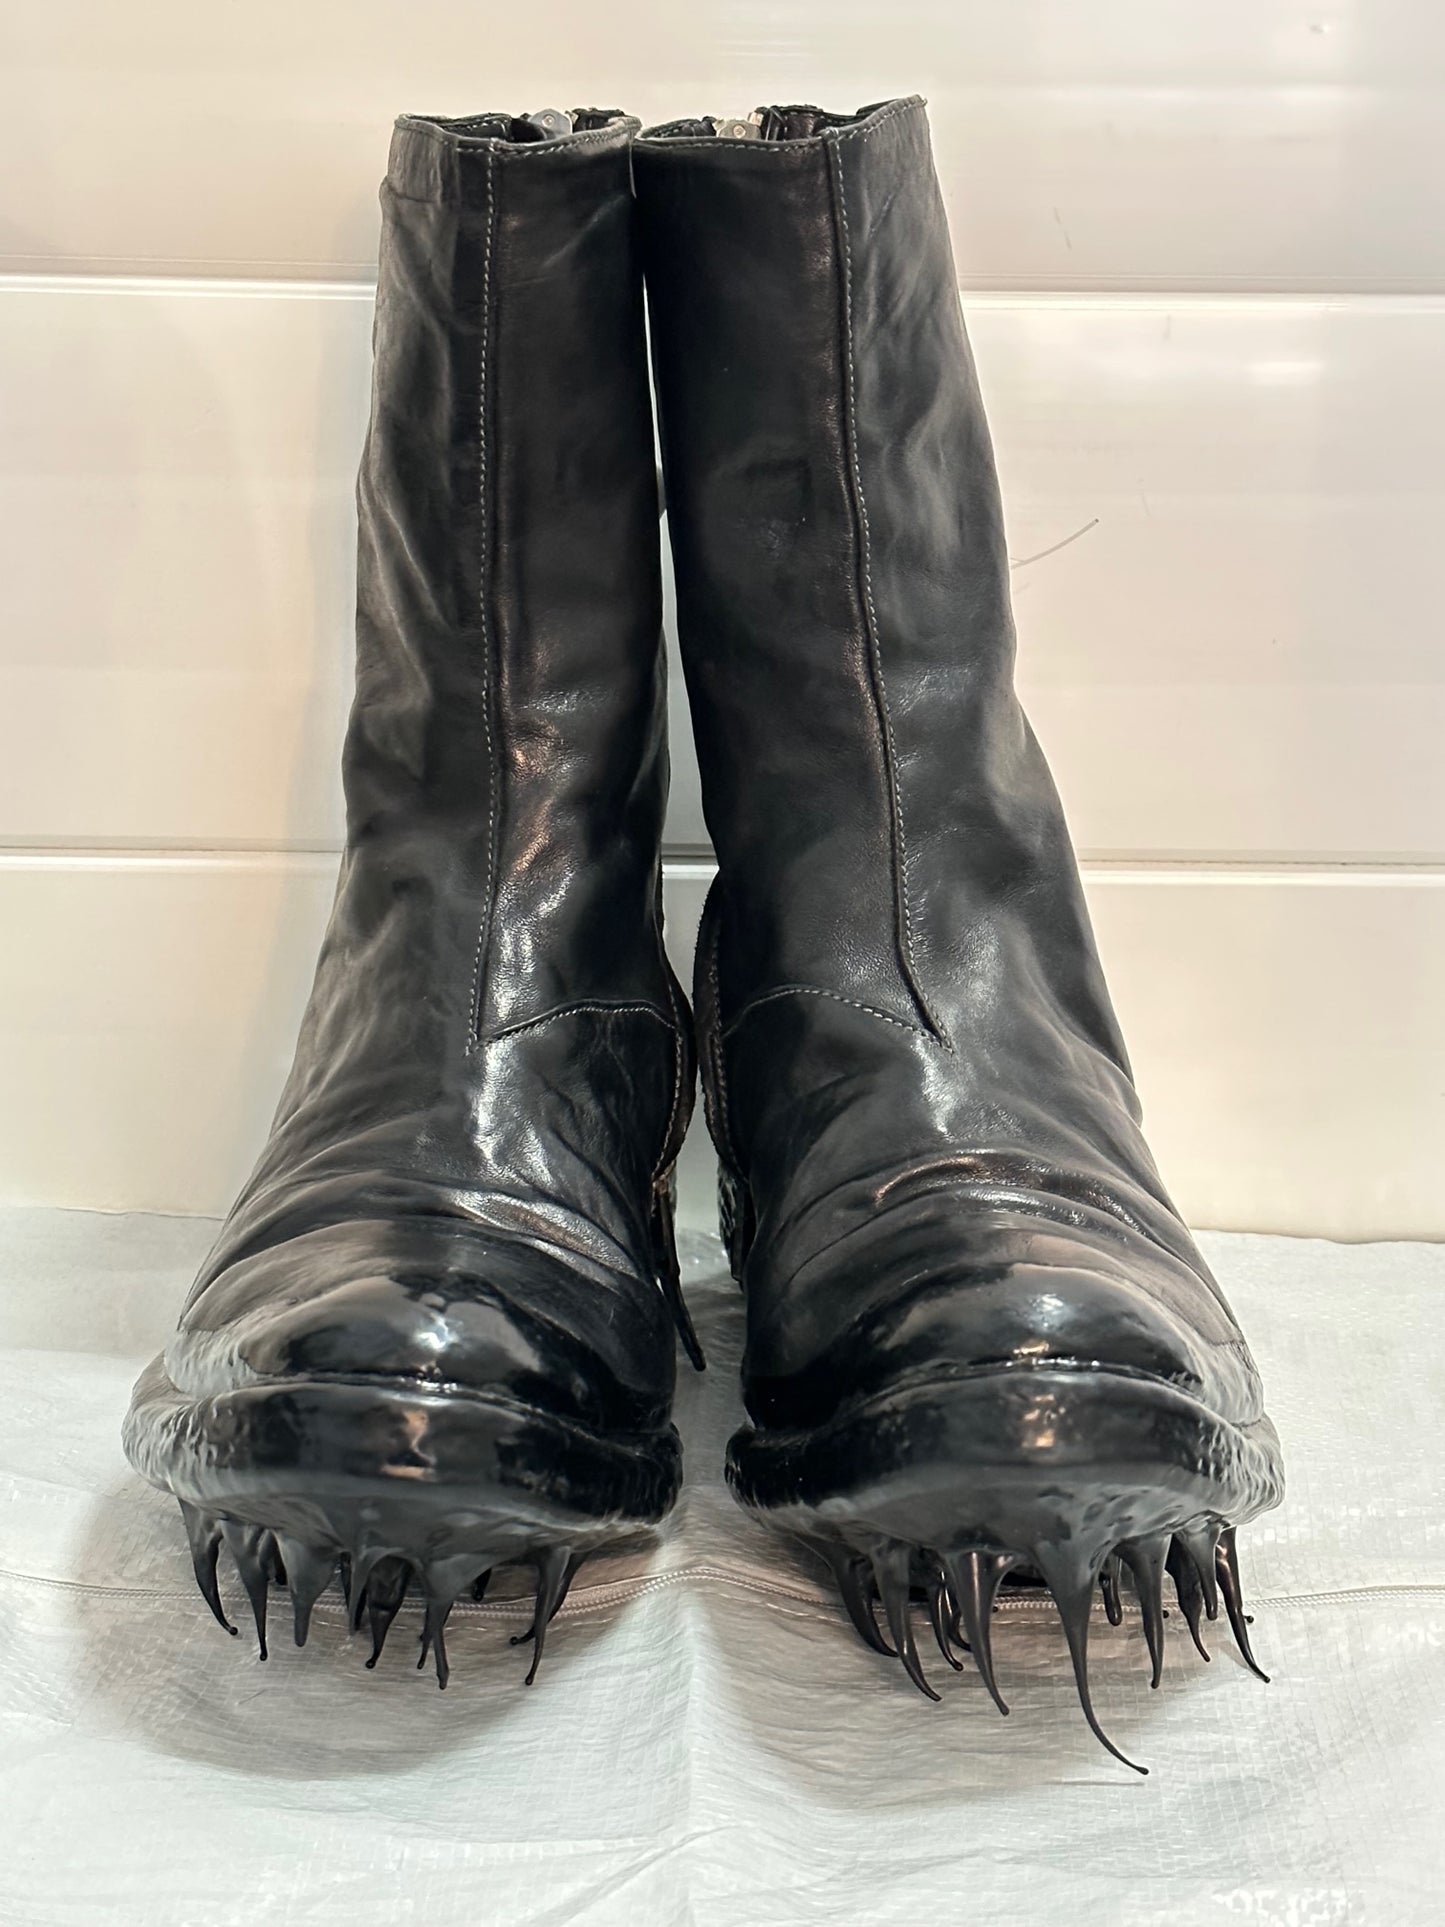 Object Dyed Lined Diagonal Zip Rubber Drip Goodyear Boots by Carol Christian Poell